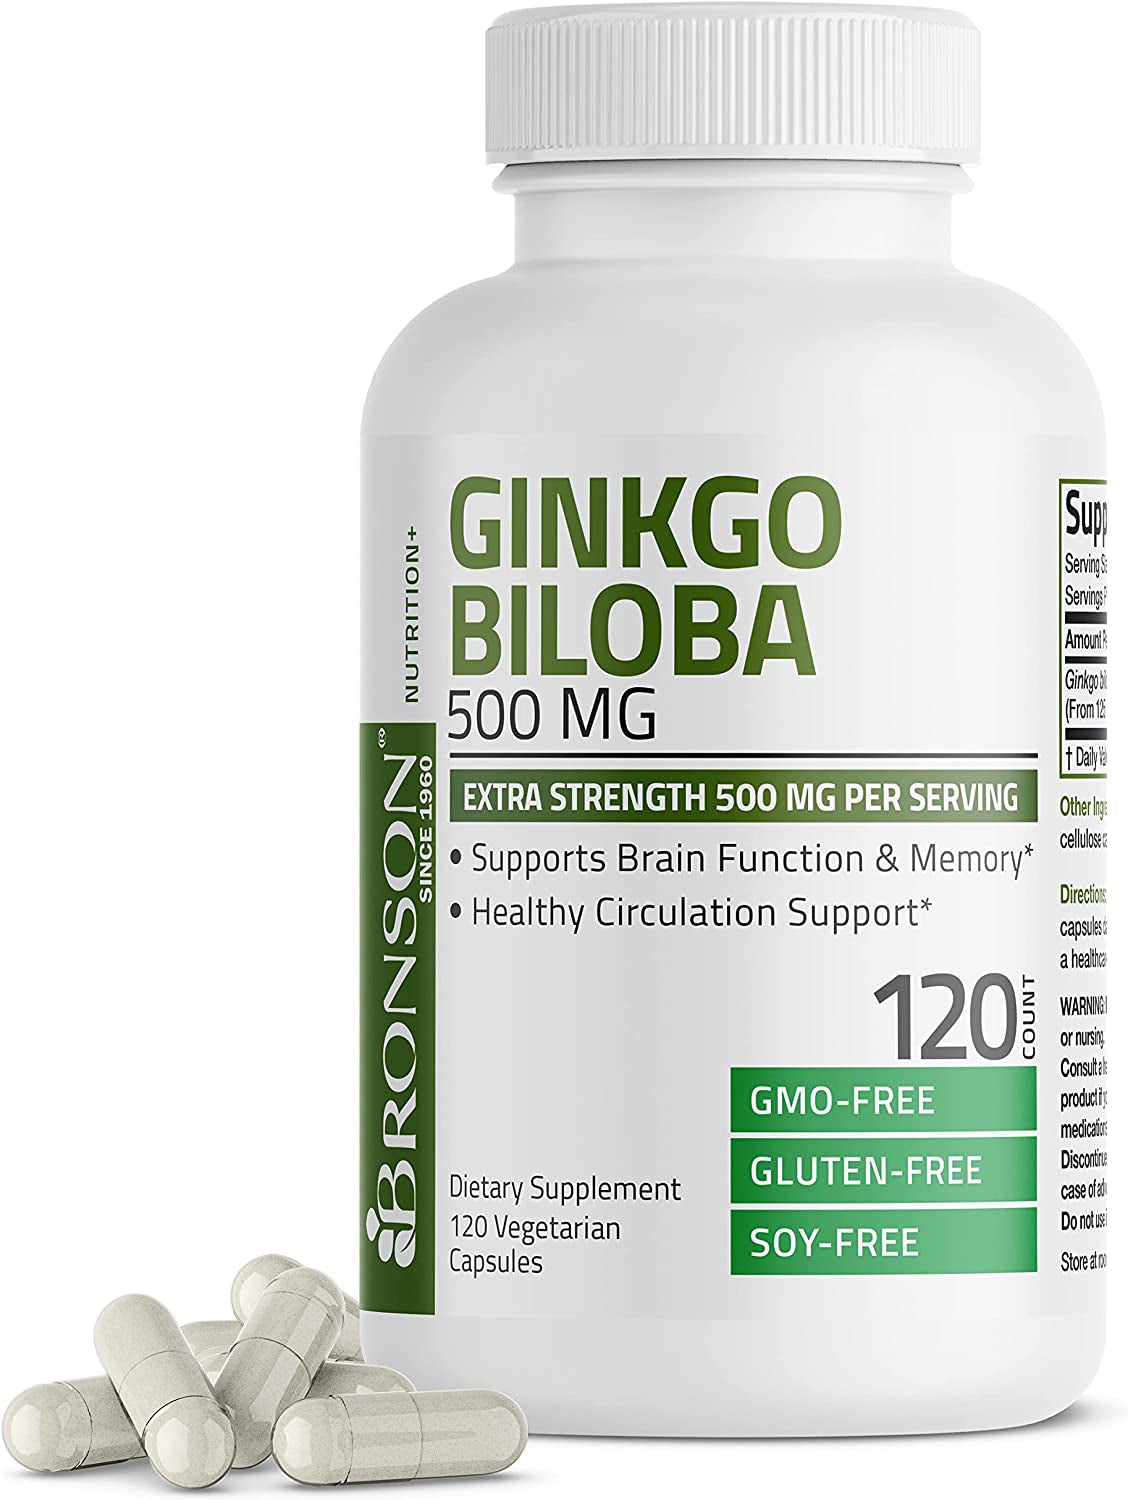 Bronson Ginkgo Biloba 500Mg Extra Strength 500Mg per Serving - Supports Brain Function & Memory Support, 120 Vegetarian Capsules